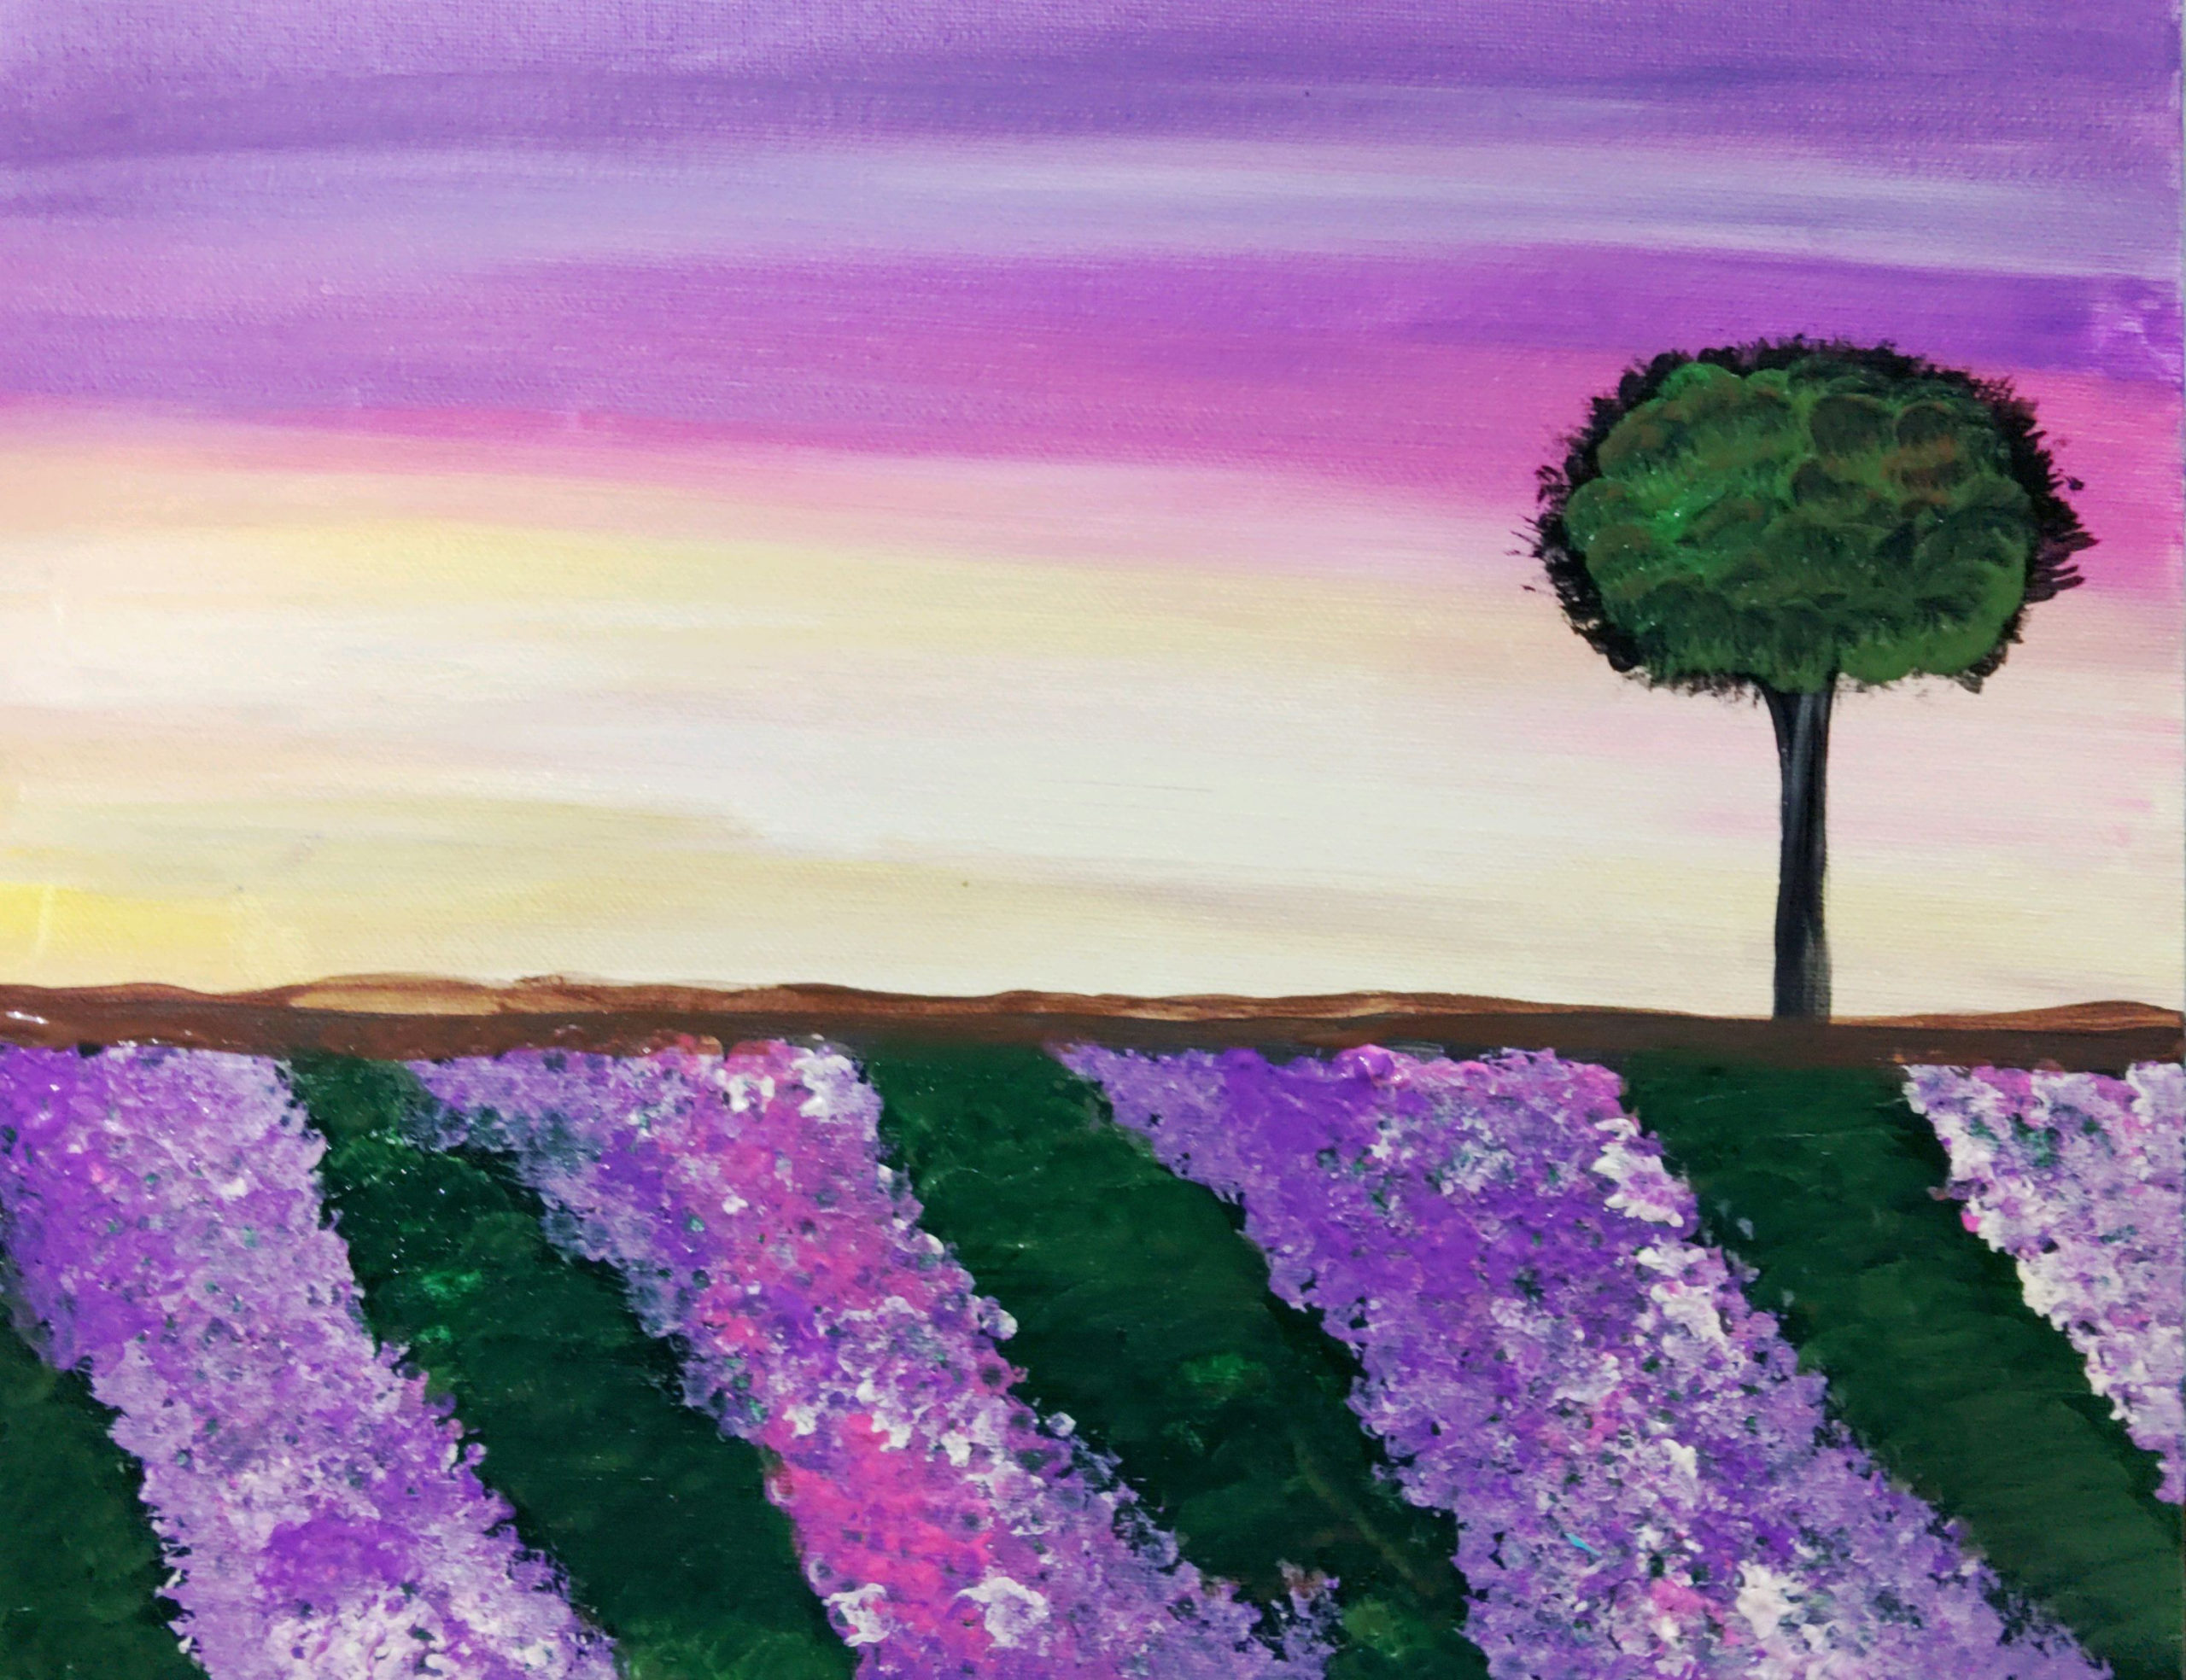 4th Painting scaled - Painting Night benefiting Harbor Hospice Foundation - May 24